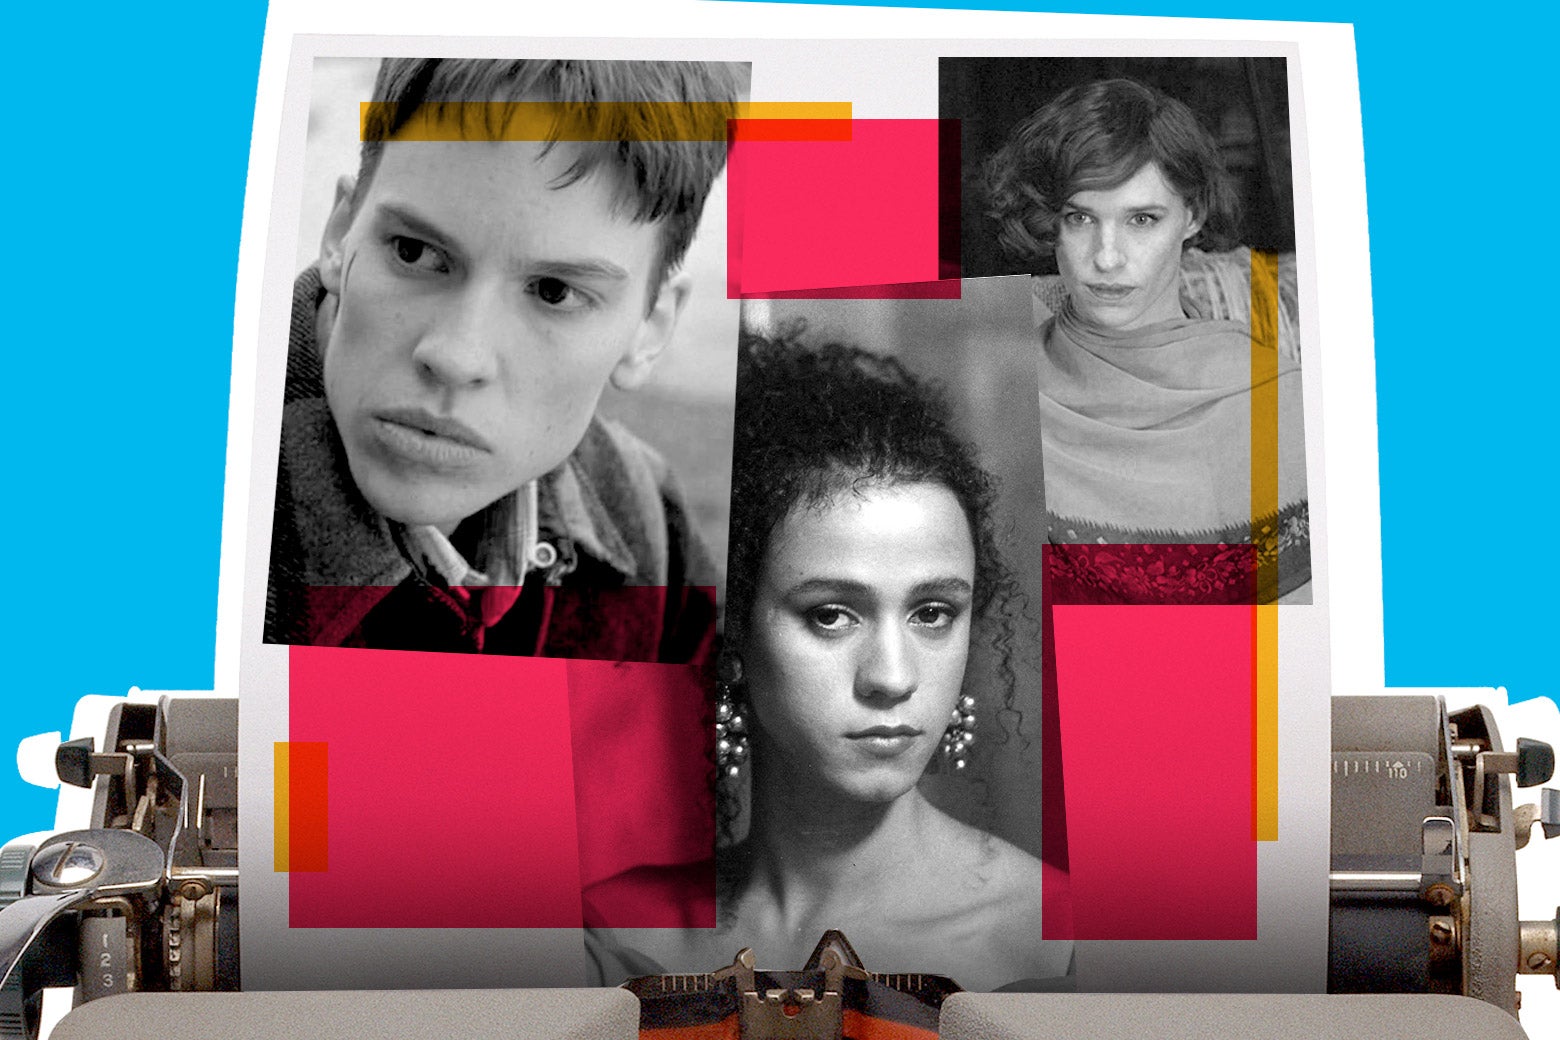 Photo illustration: Hillary Swank in Boys Don't Cry, Jaye Davidson in The Crying Game, and Eddie Redmayne in The Danish Girl